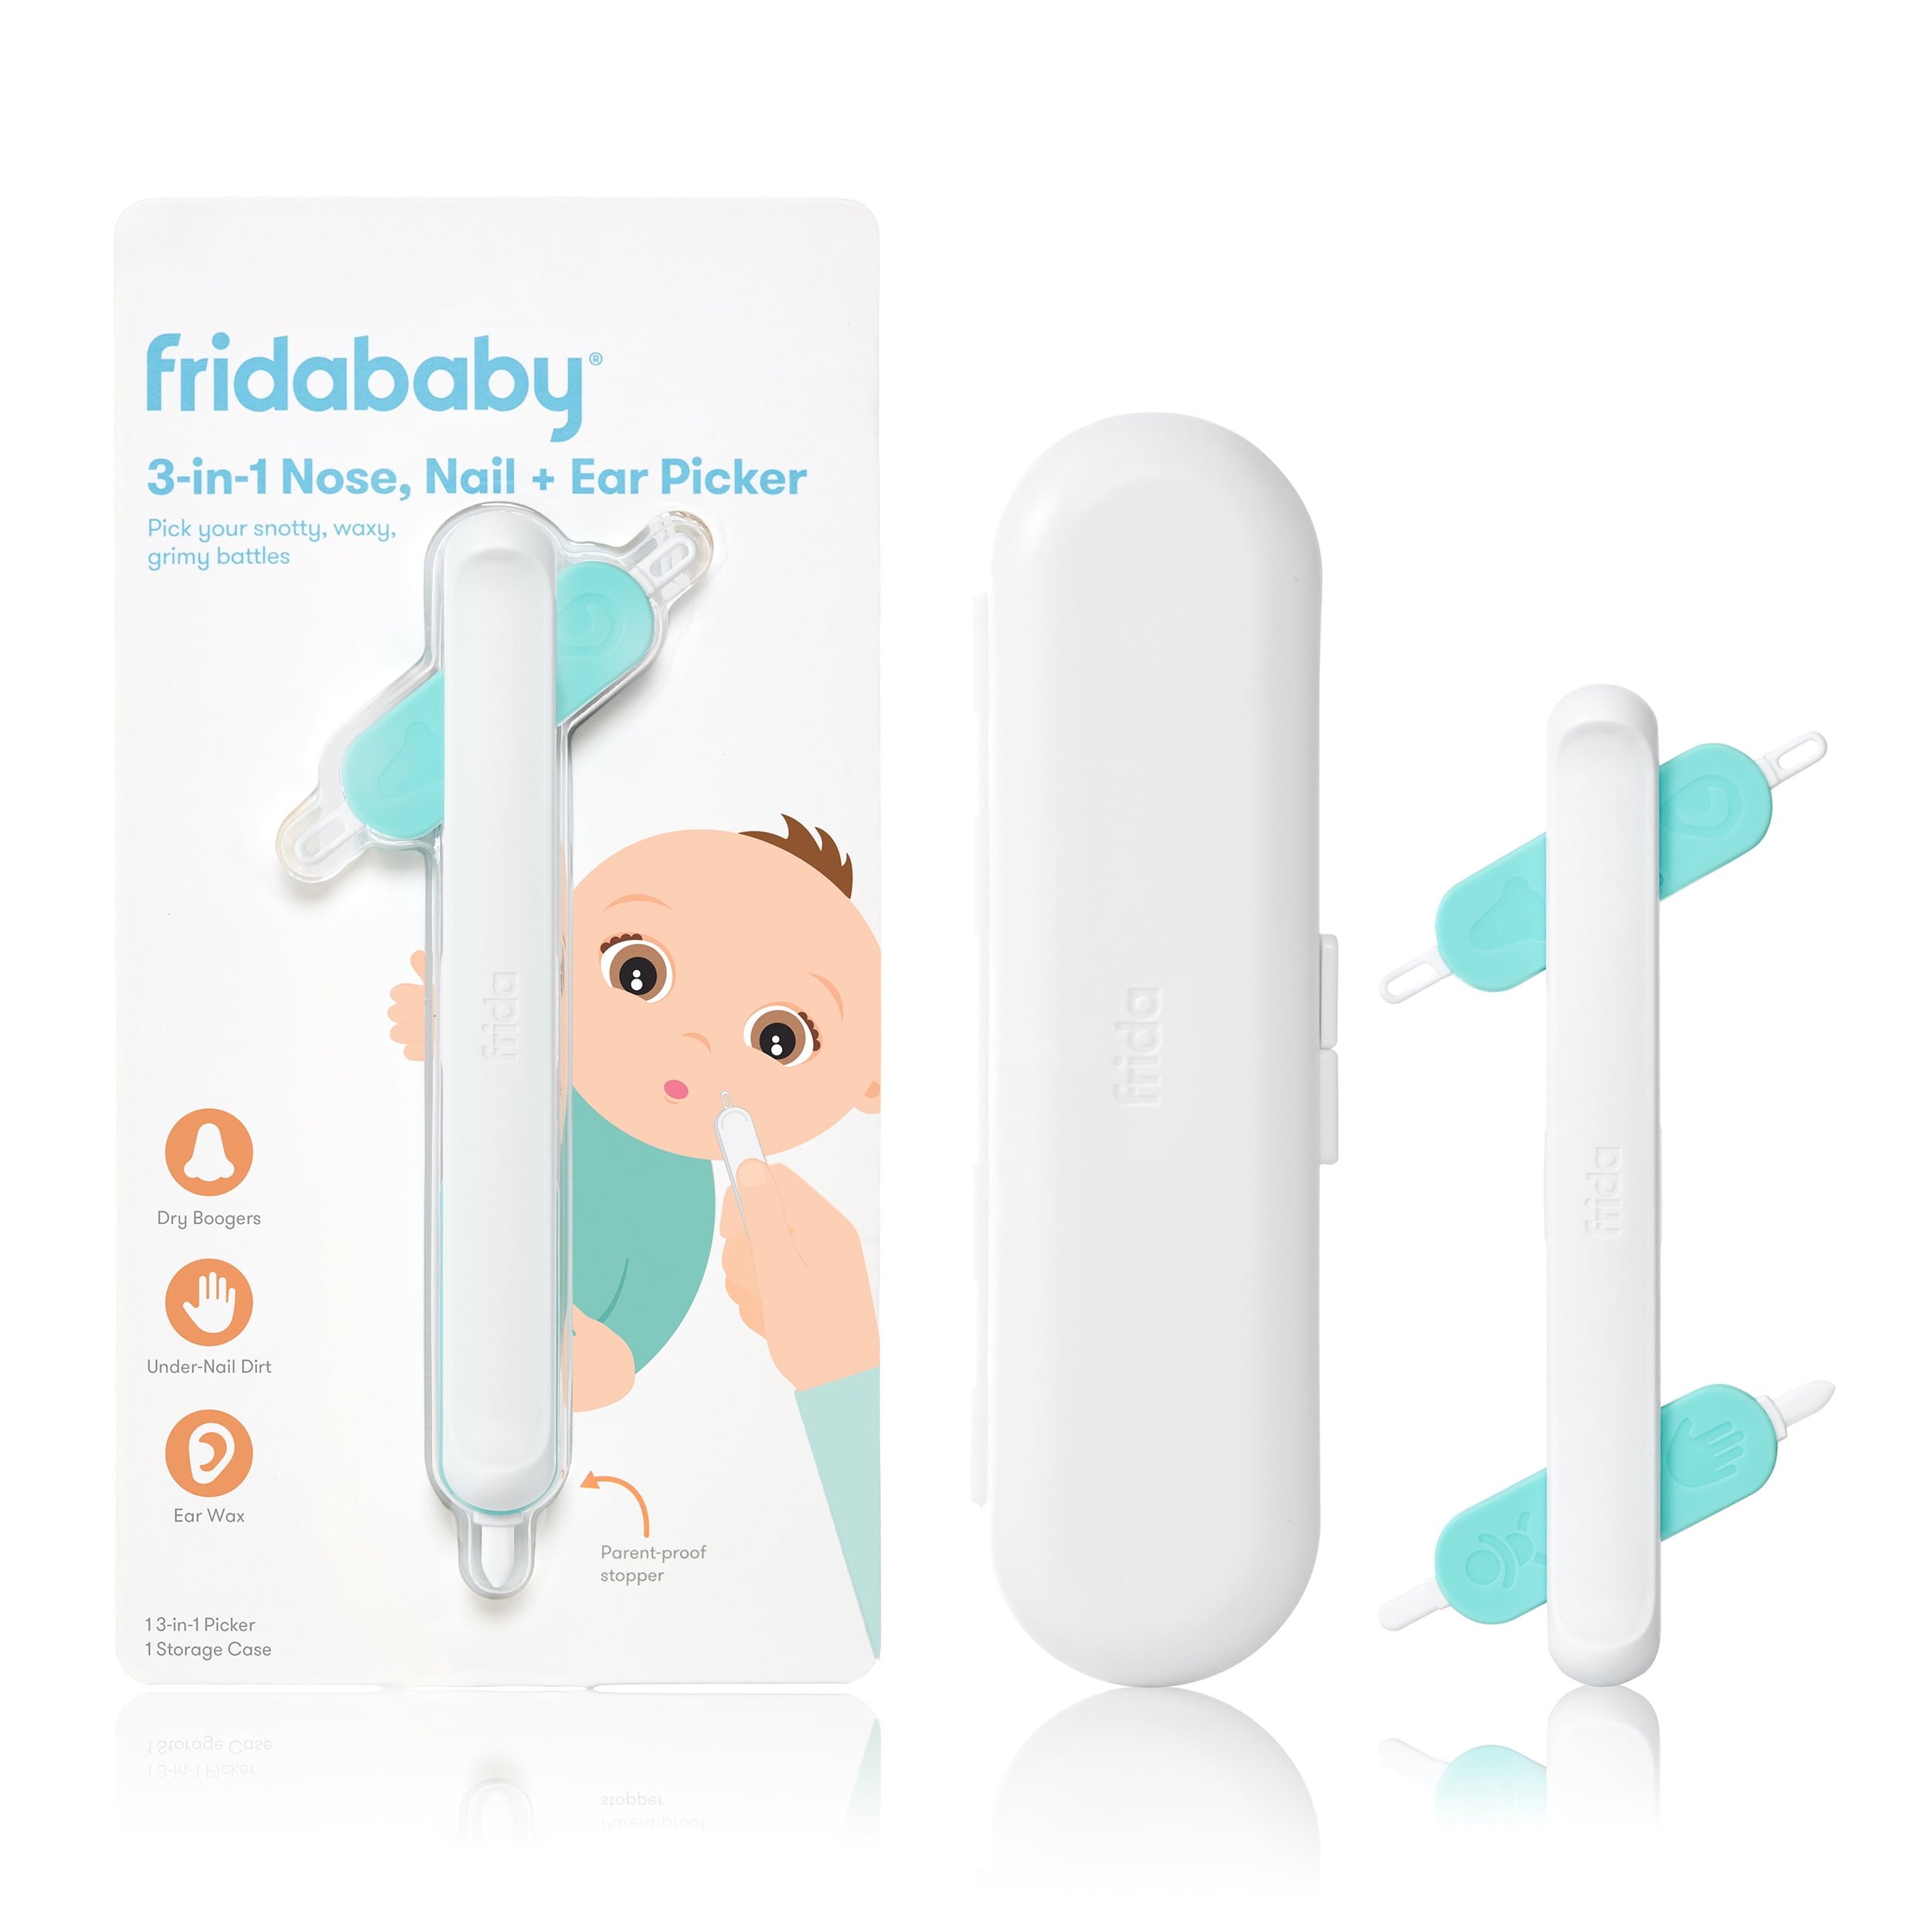 FridaBaby 3 in 1 Nose Nail and Ear Picker for sale online